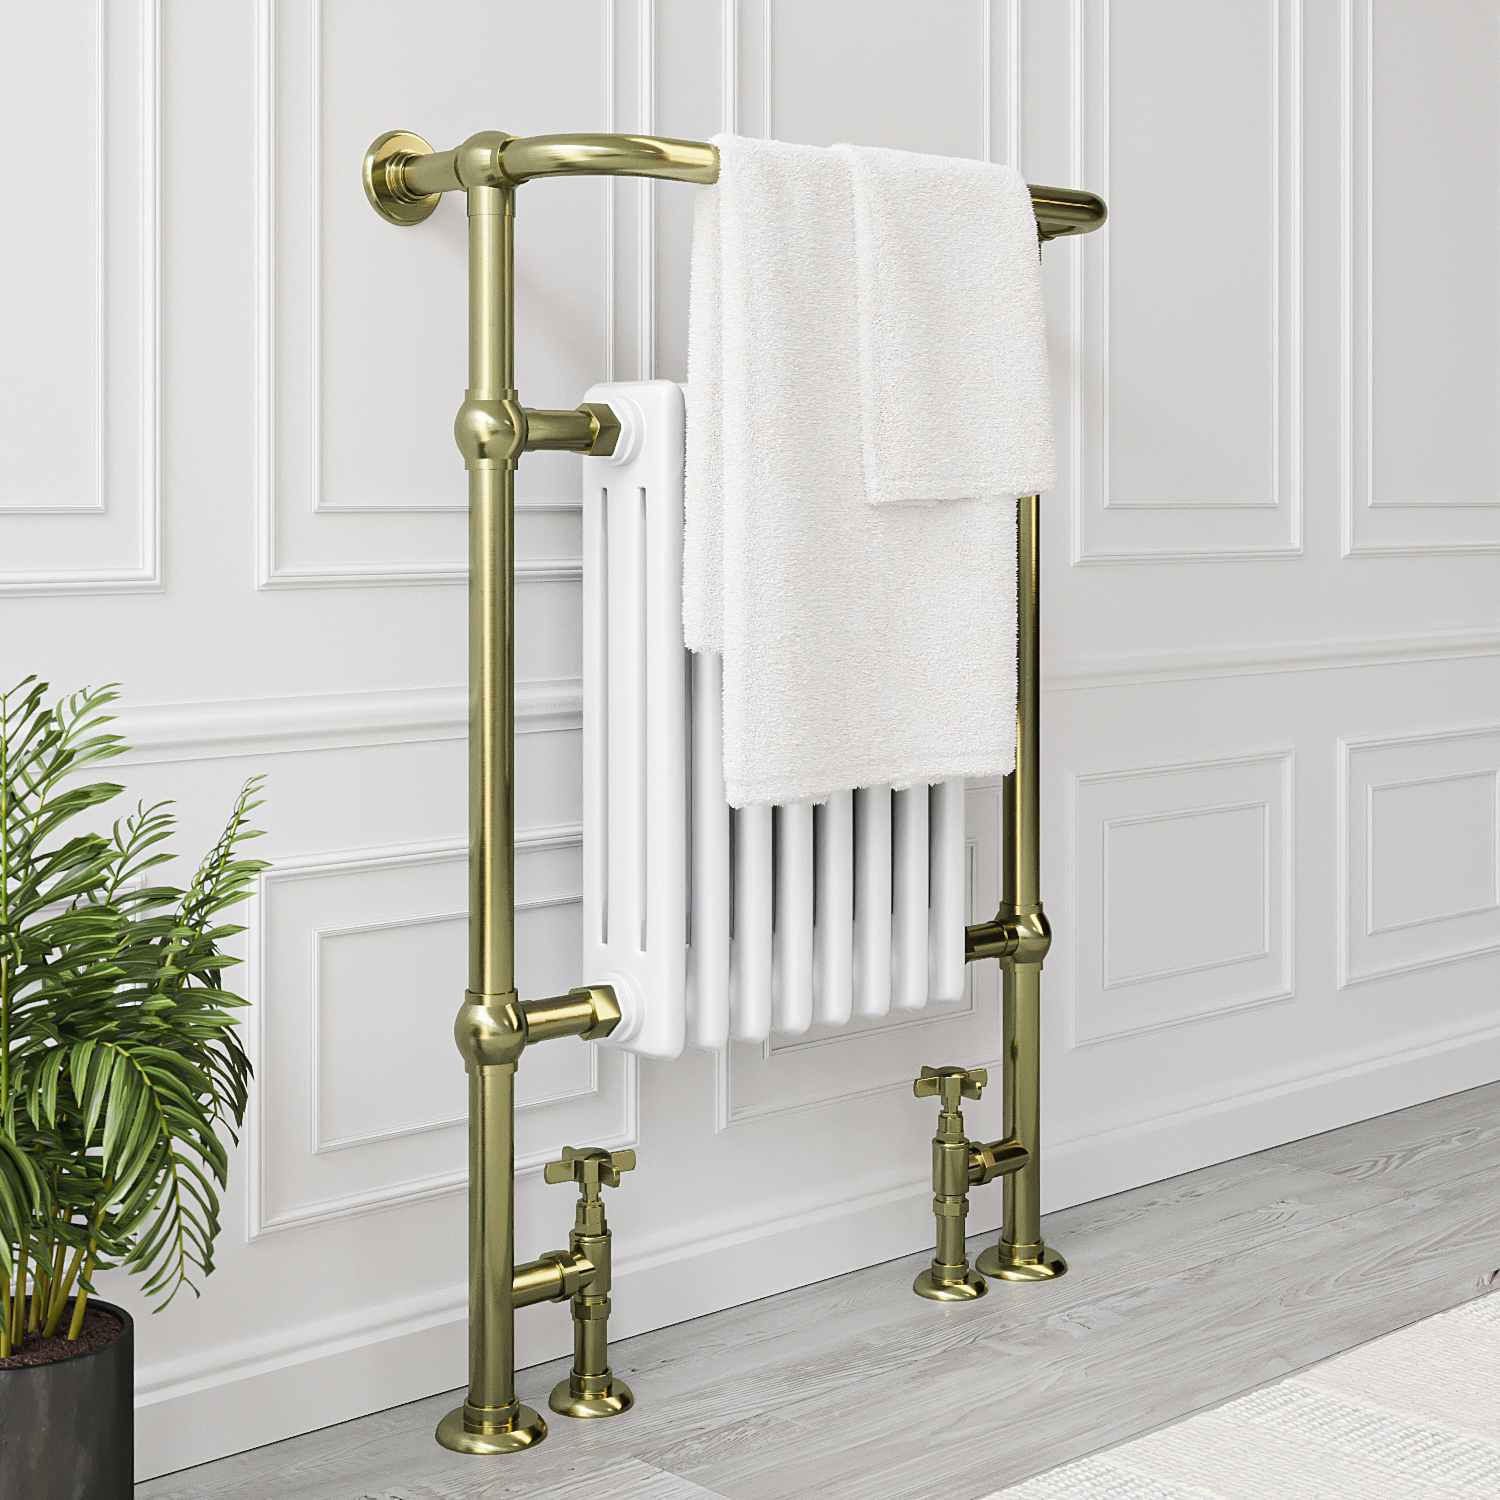 White and Brass Traditional Column Radiator with Towel Rail 952 x